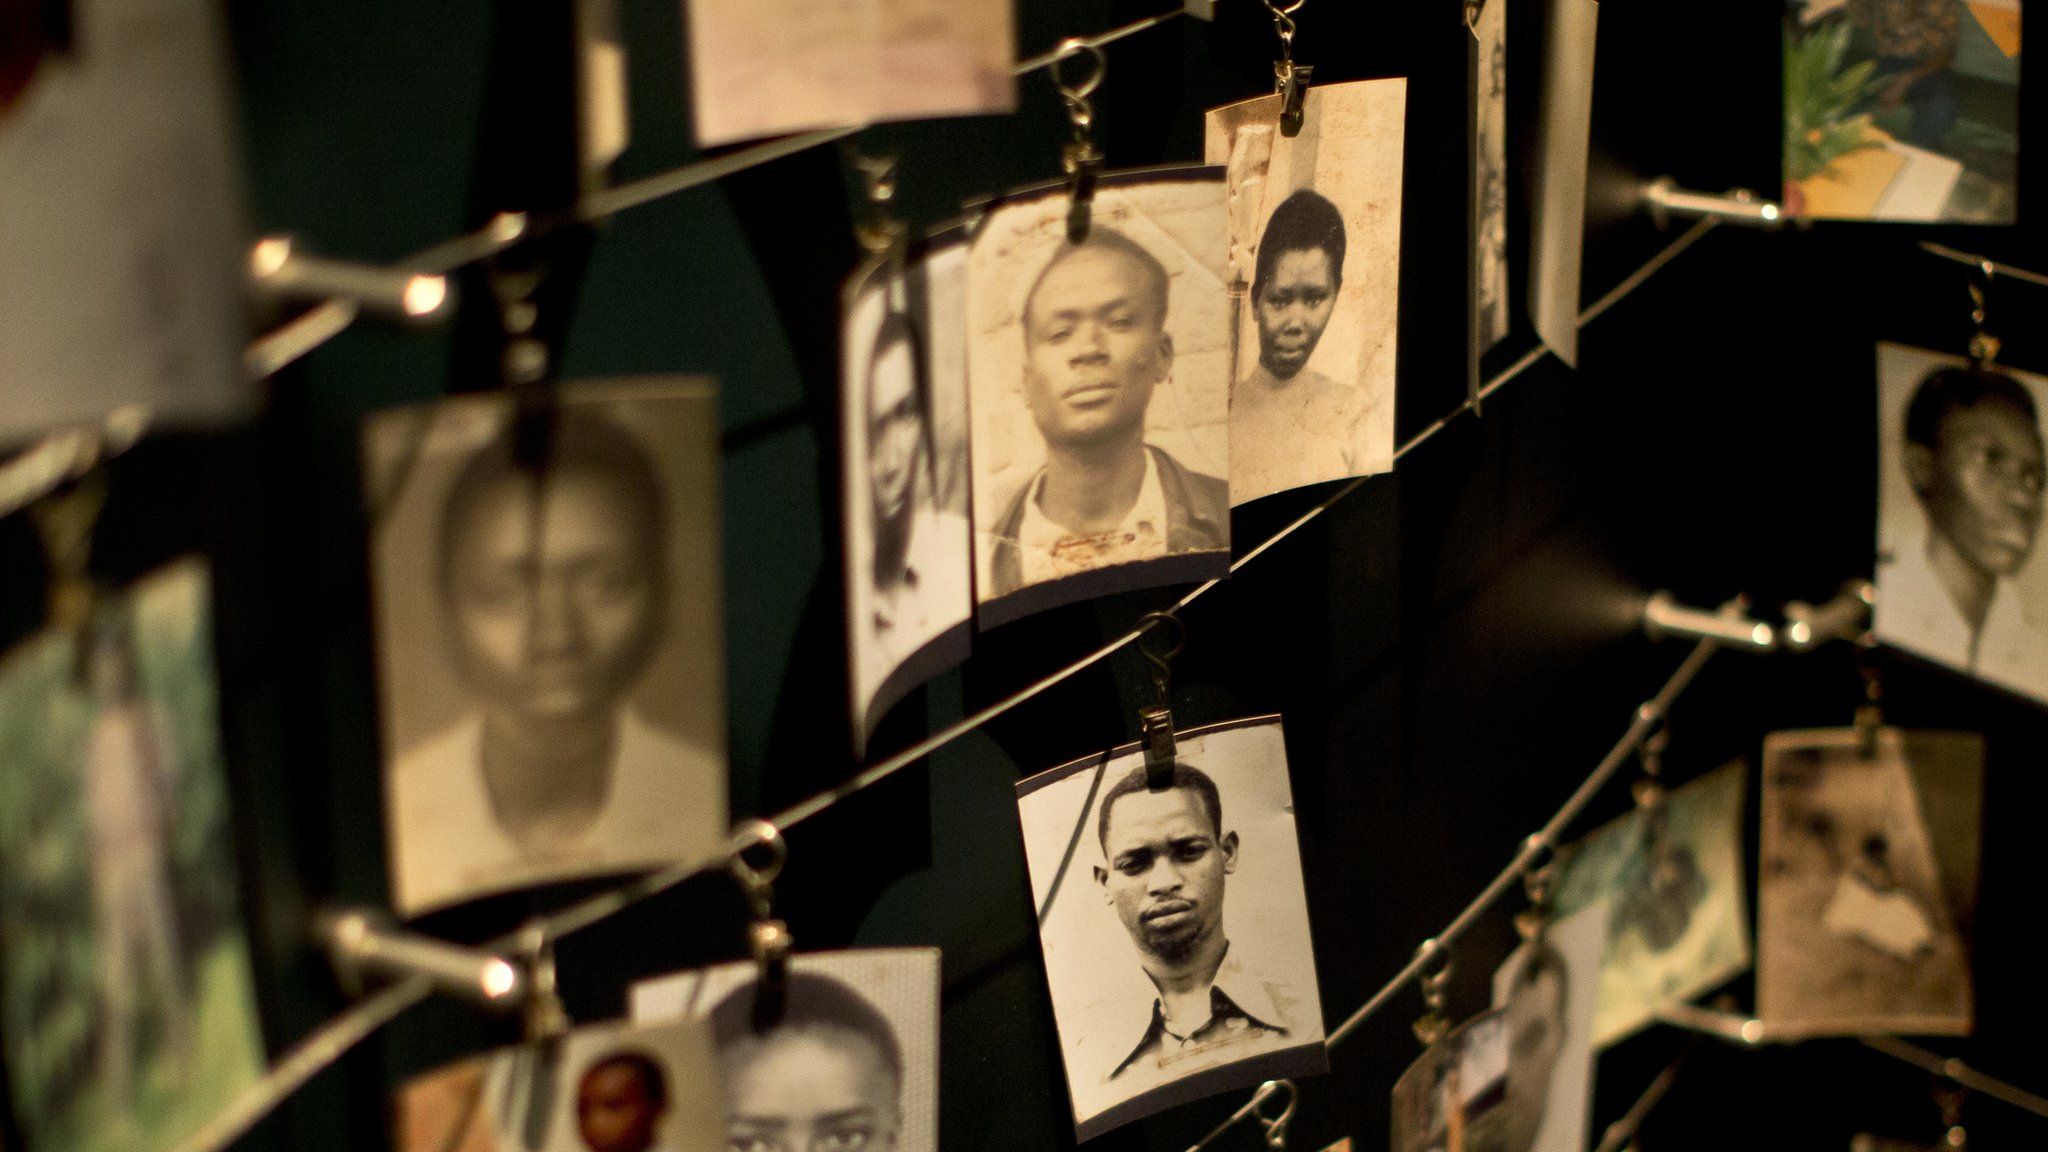 Photographs of some of those who died hang in a display in the Kigali Genocide Memorial Centre, Rwanda. 5 April 2015